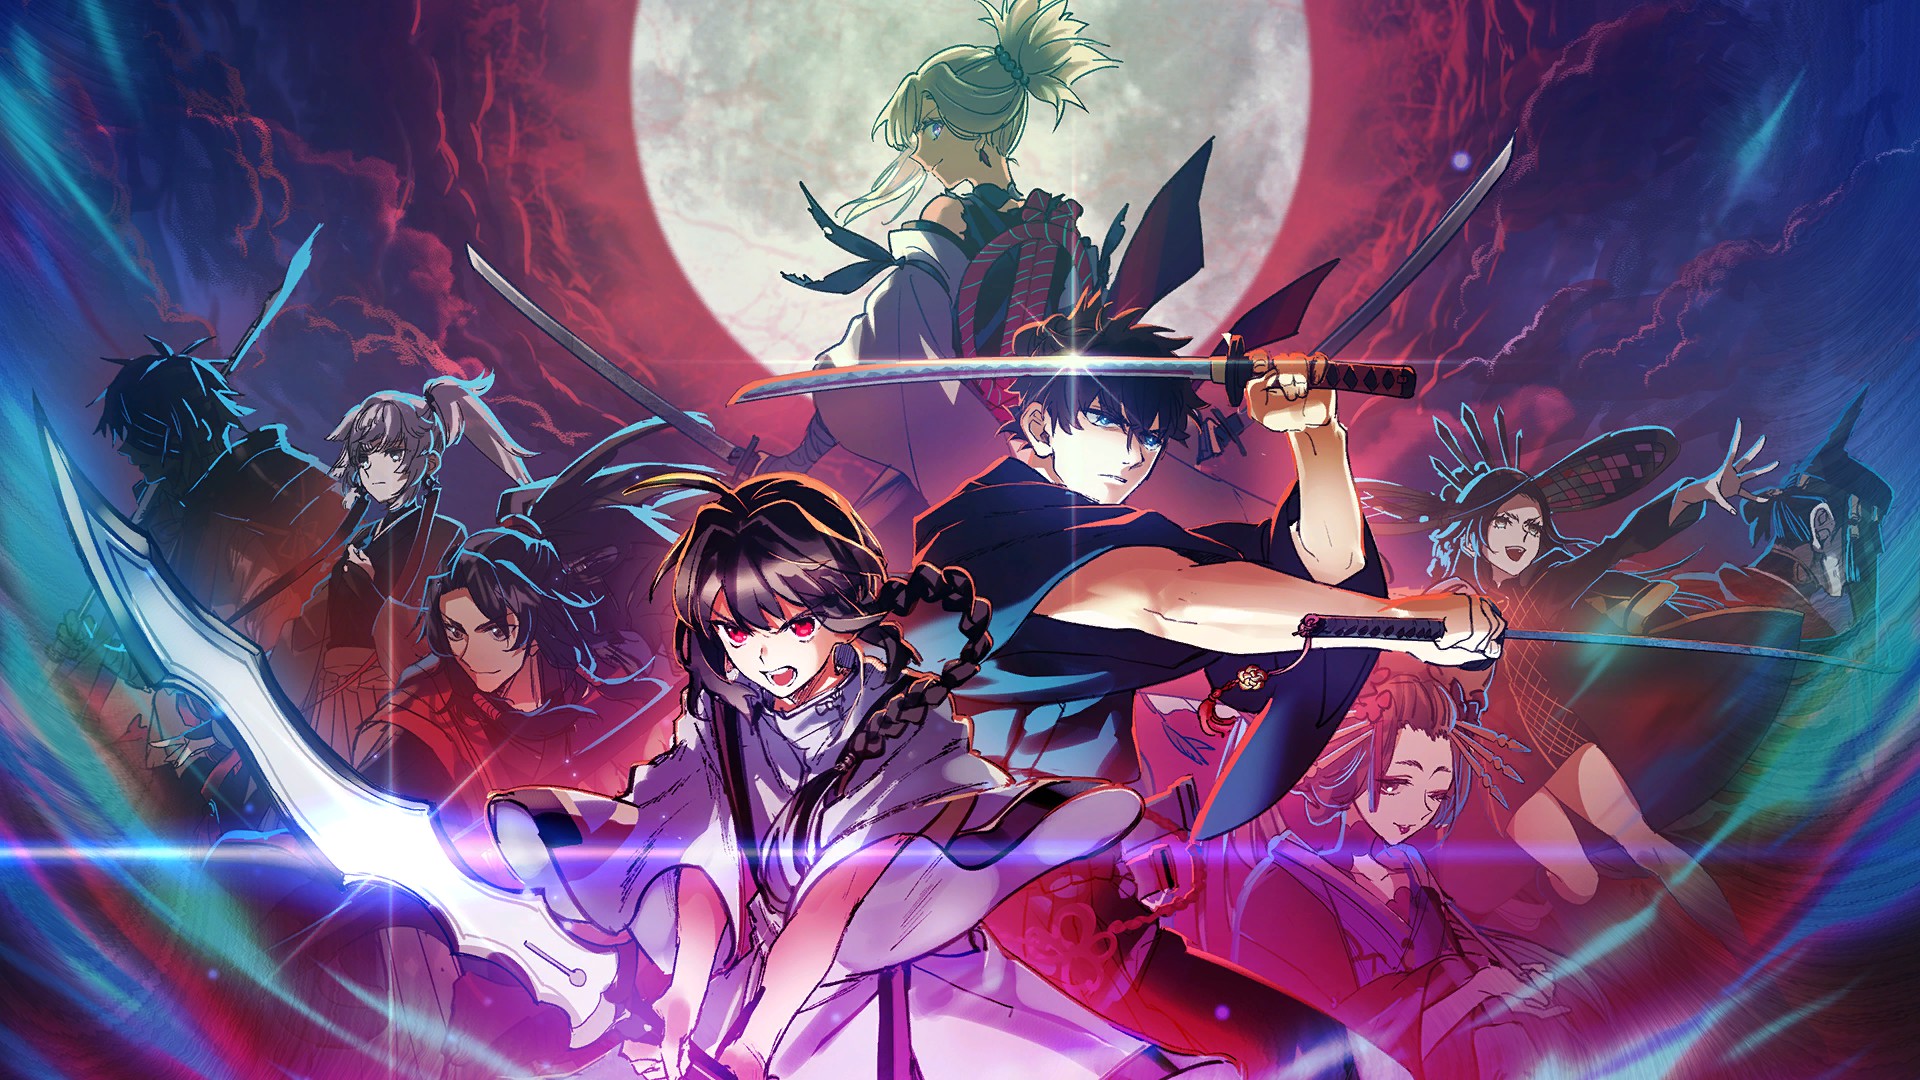 RPG Site on X: Fate/Samurai Remnant isn't the first Fate franchise-based  game to blend brawling action and RPG mechanics, but in its first few hours  it takes advantage of its period setting